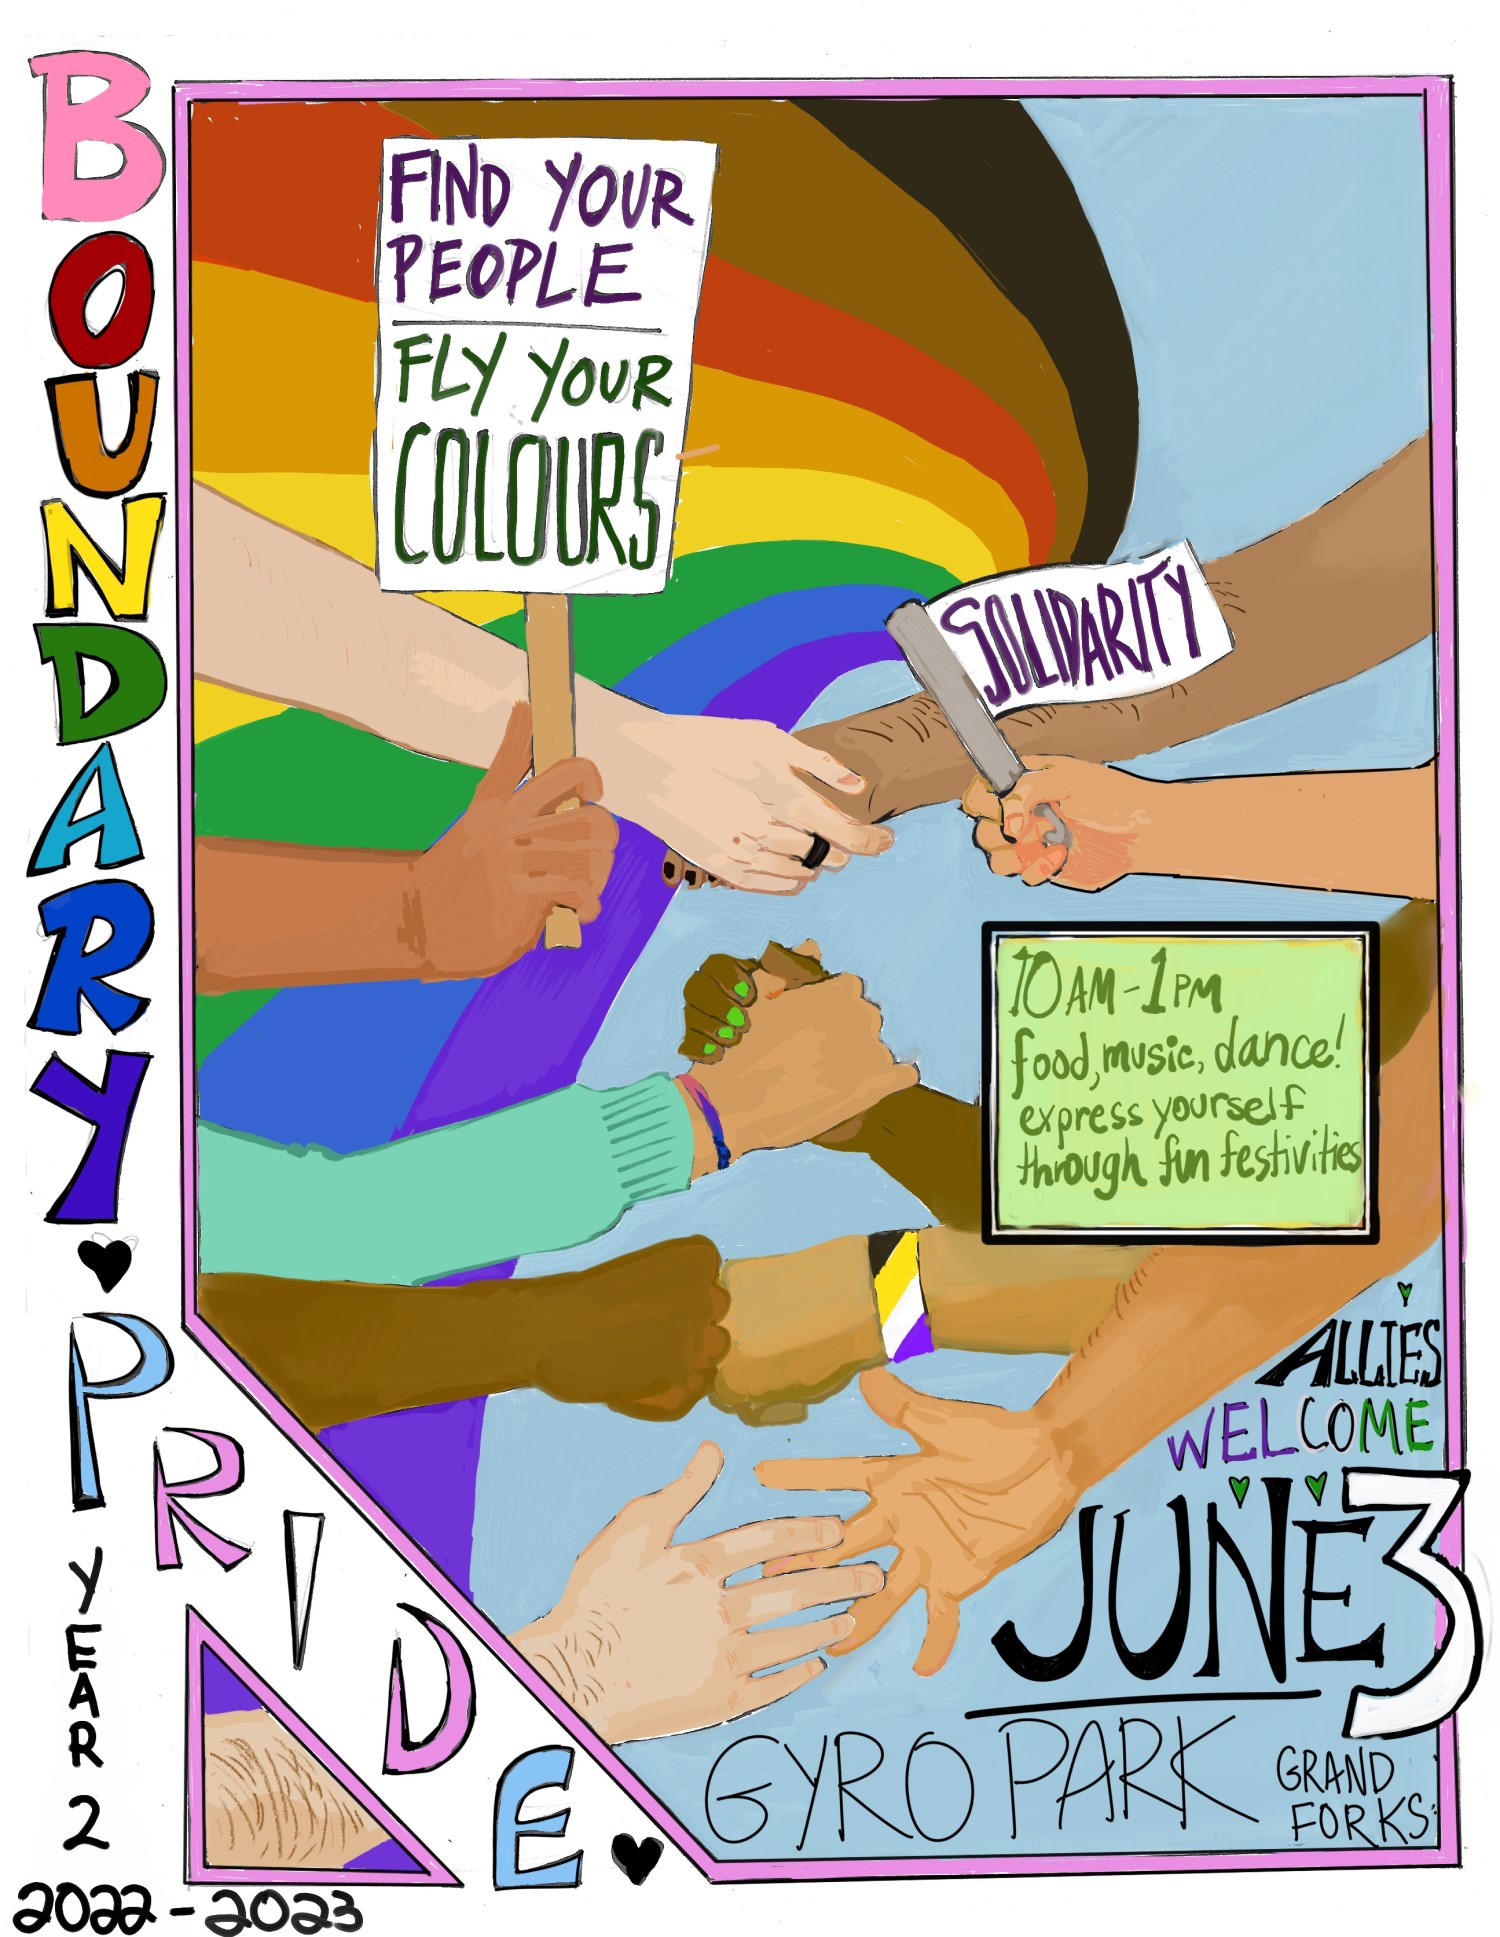 Poster for 2022-2023 Boundary Pride. Find your people, fly your colours. Allies welcome. Food, music, and dance. Express yourself through fun activities.